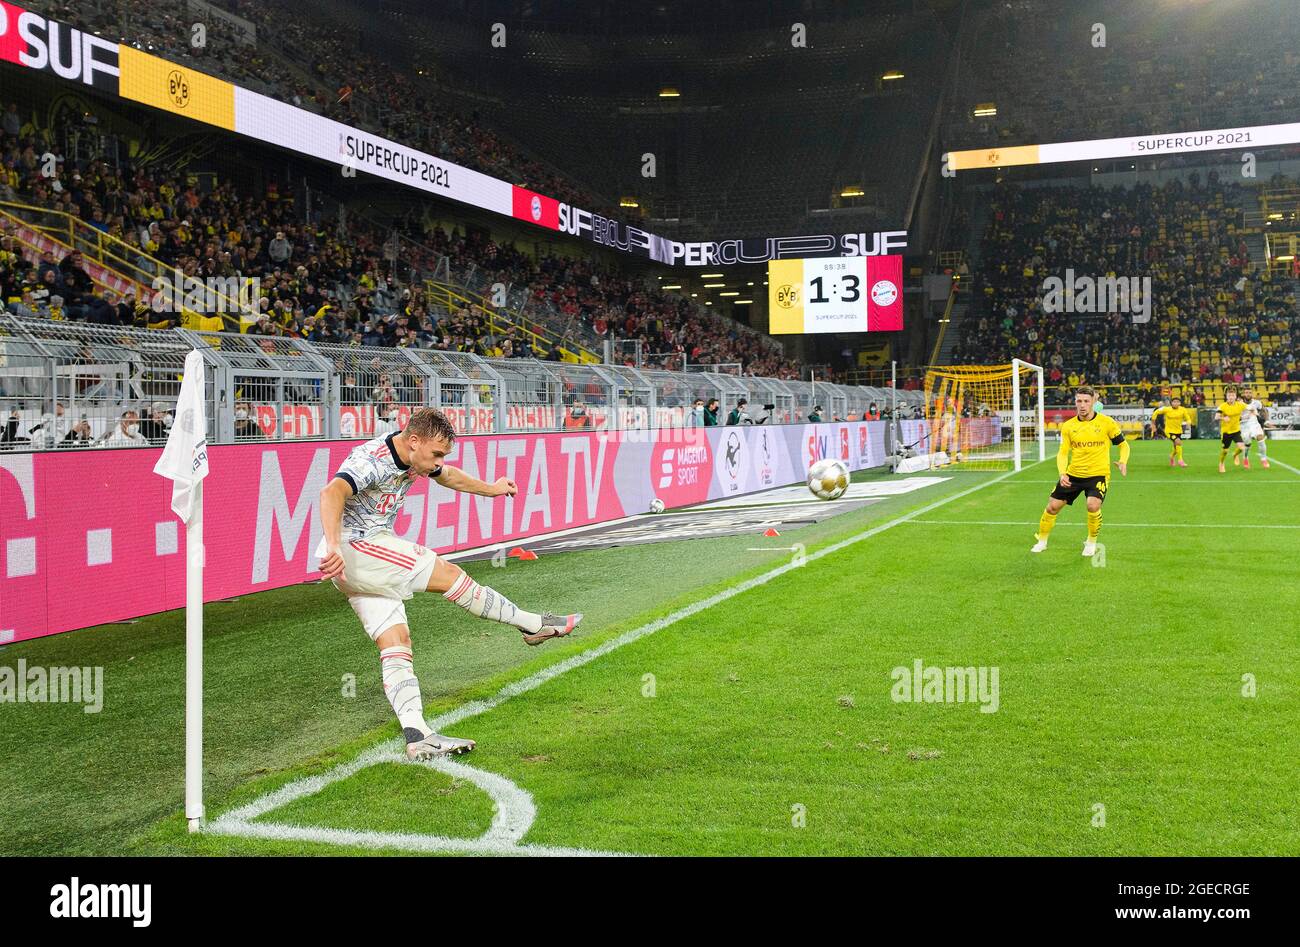 Dortmund, Deutschland. 17th Aug, 2021. Corner kick Joshua KIMMICH (M) in Signal-Iduna-Park, Action, Soccer Supercup Final, Borussia Dortmund (DO) - FC Bayern Munich (M) 1: 3, on 08/17/2021 in Dortmund/Germany. #DFL regulations prohibit any use of photographs as image sequences and/or quasi-video # Â Credit: dpa/Alamy Live News Stock Photo